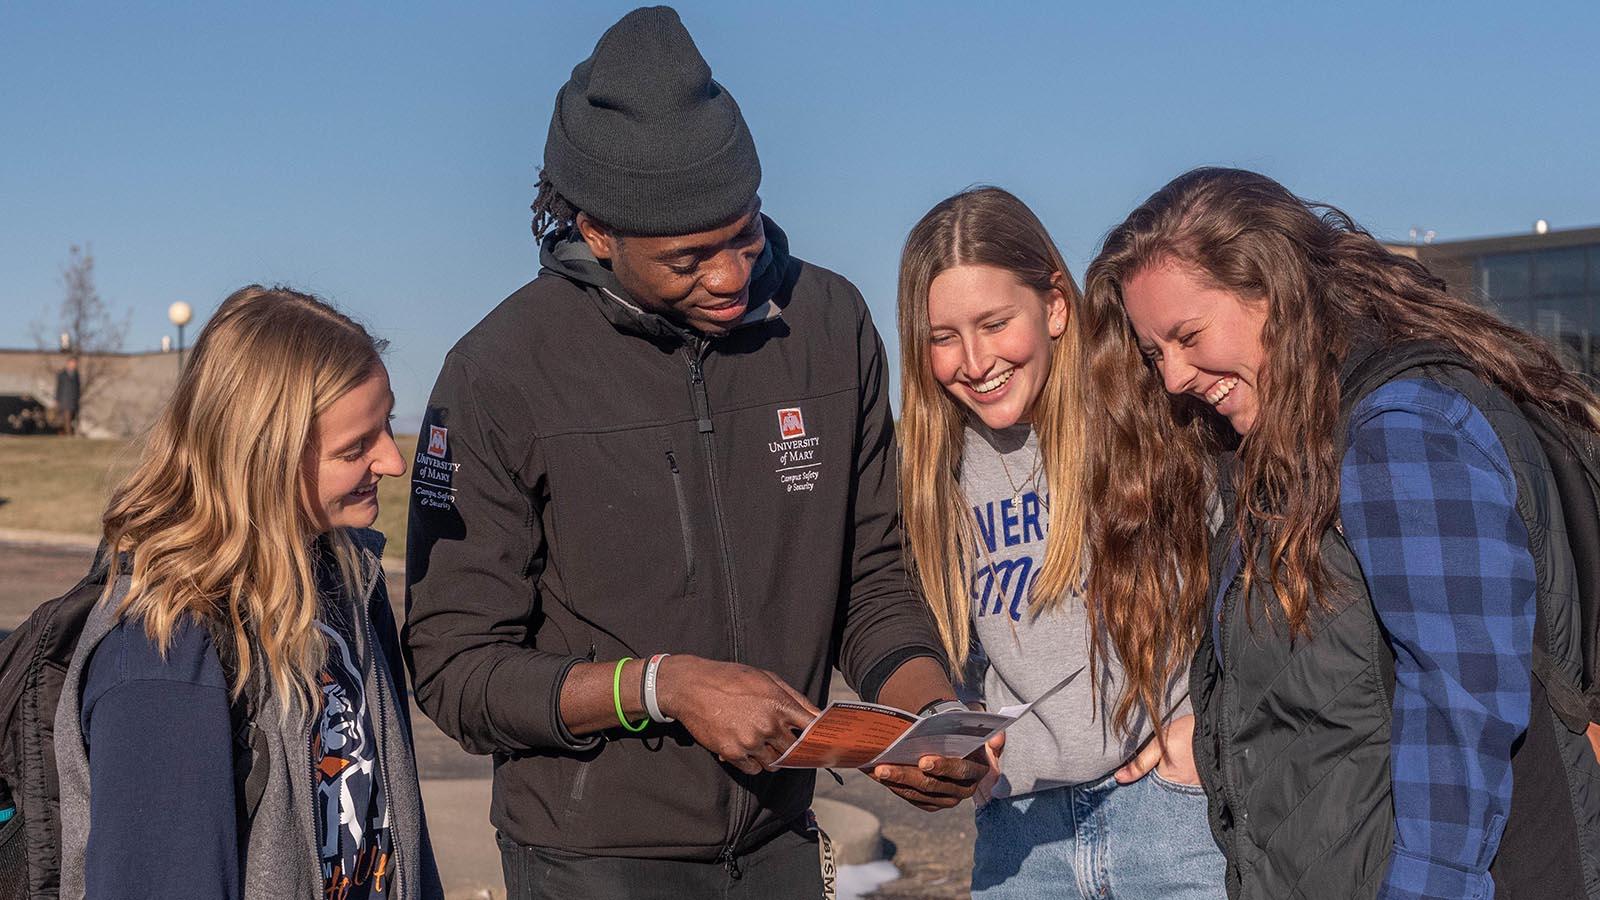 Campus Safety & Security employee showing three female students a campus map.